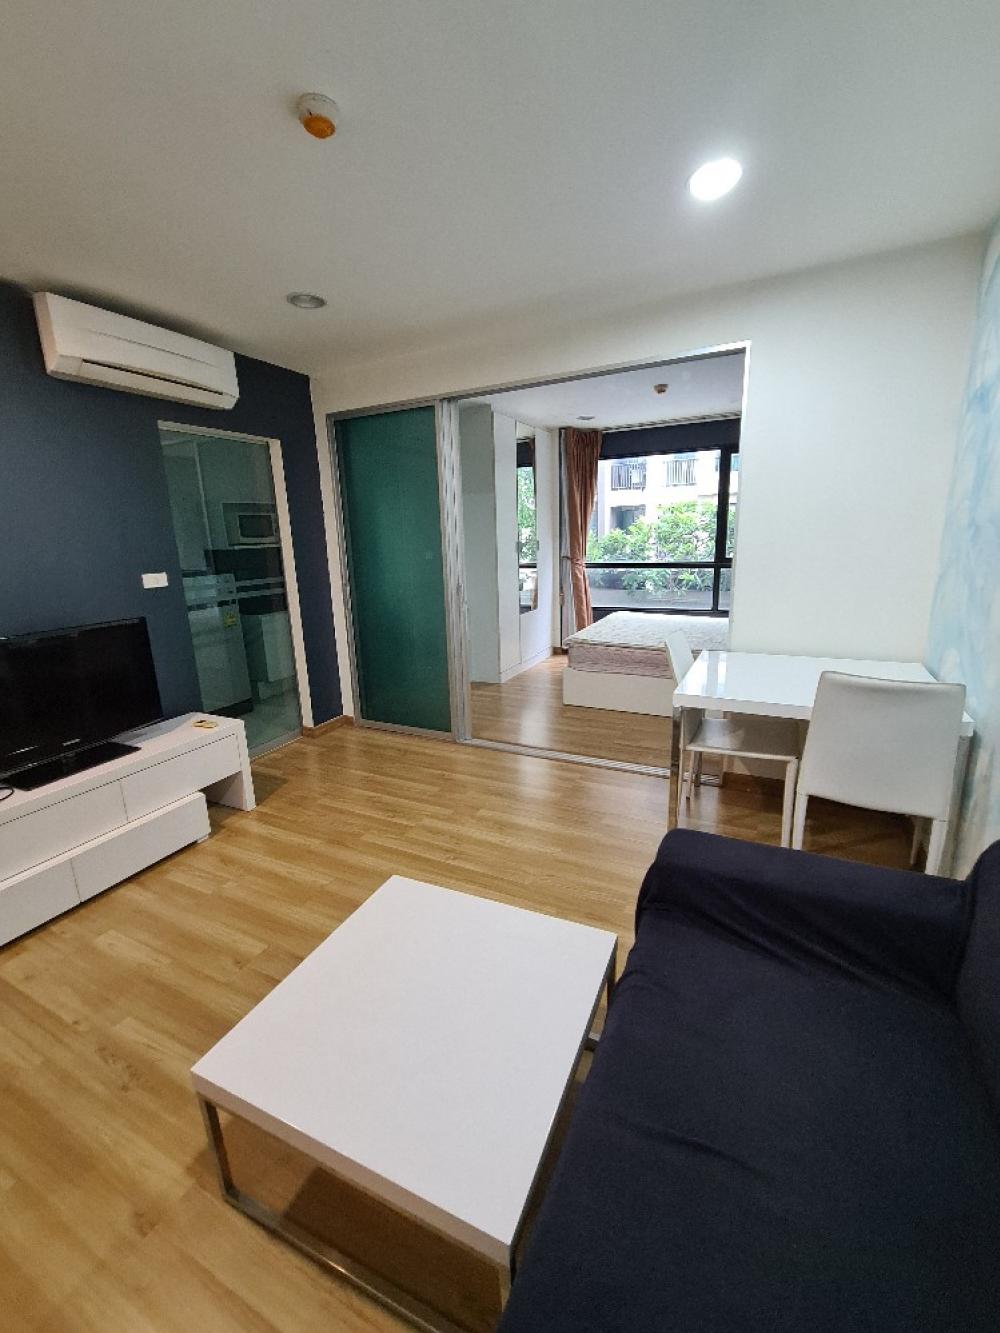 For RentCondoKaset Nawamin,Ladplakao : Condo for rent, Premio Prime Kaset-Nawamin, room size 34.5 square meters, 2 air conditioners, living room and kitchen apart, building c floor, pool view